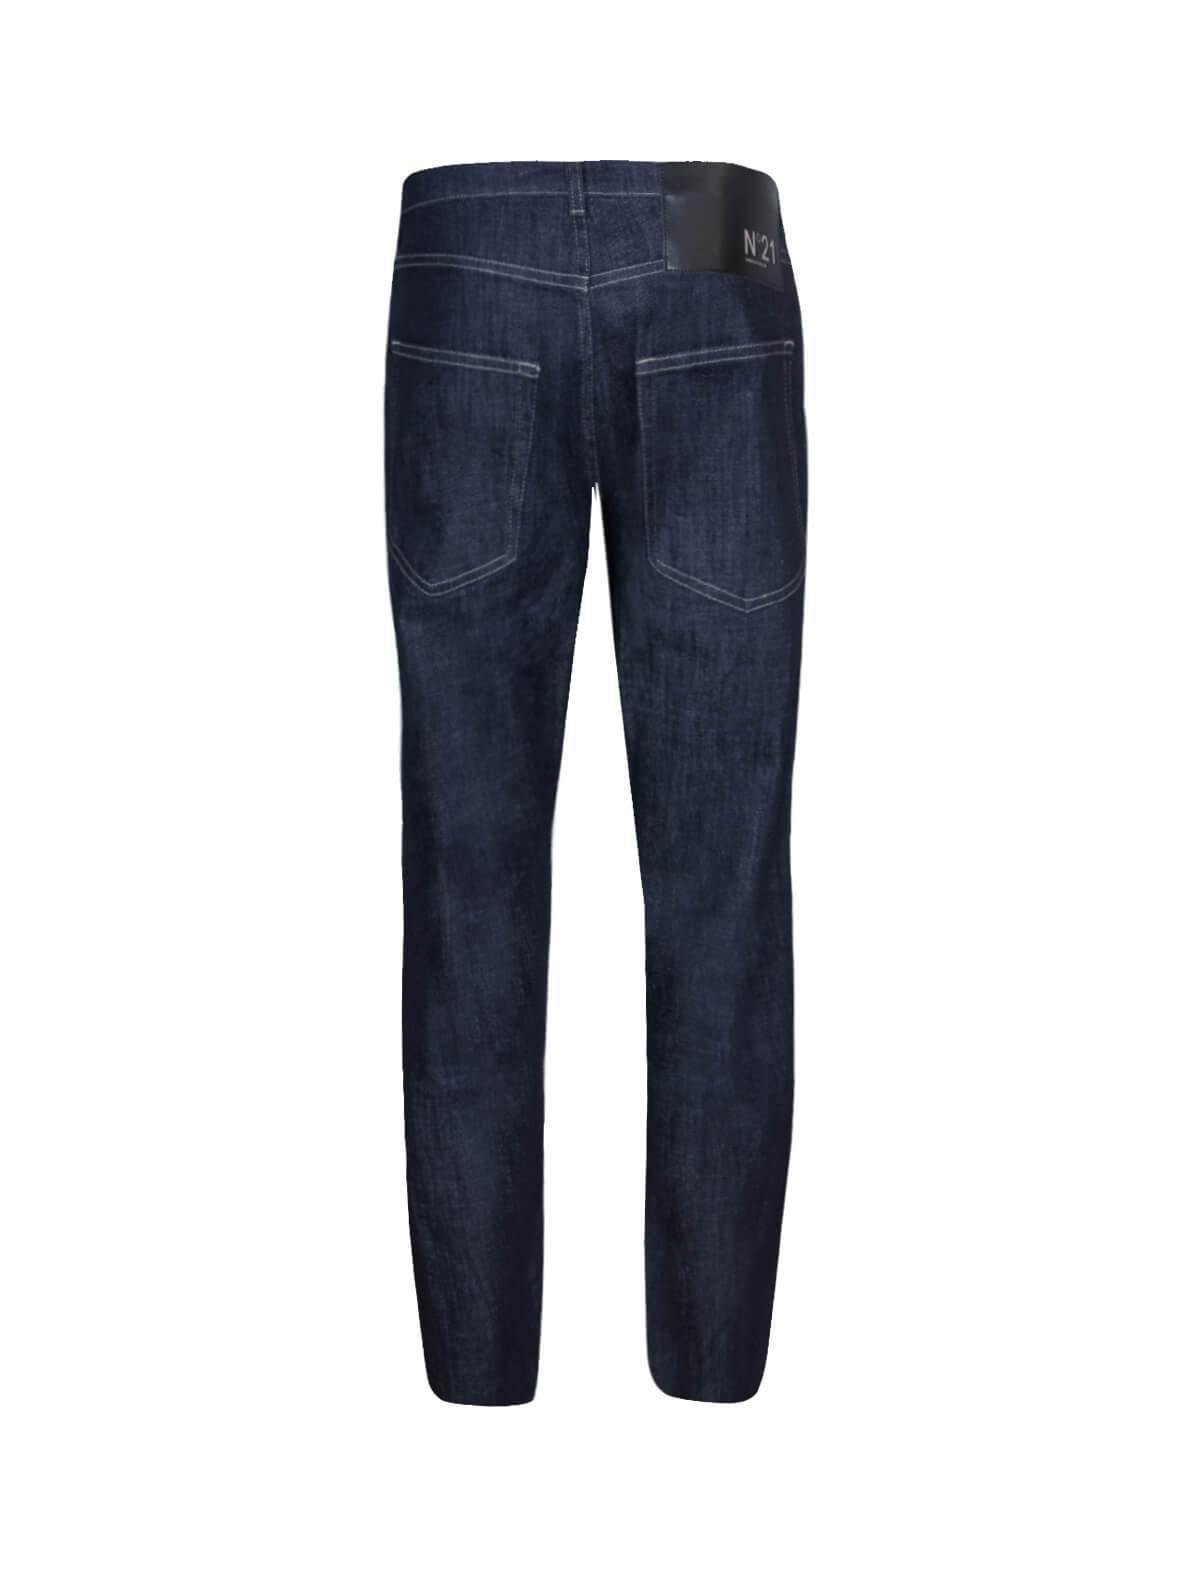 Nº21 Low-rise Straight Jeans In Navy | CLOSET Singapore